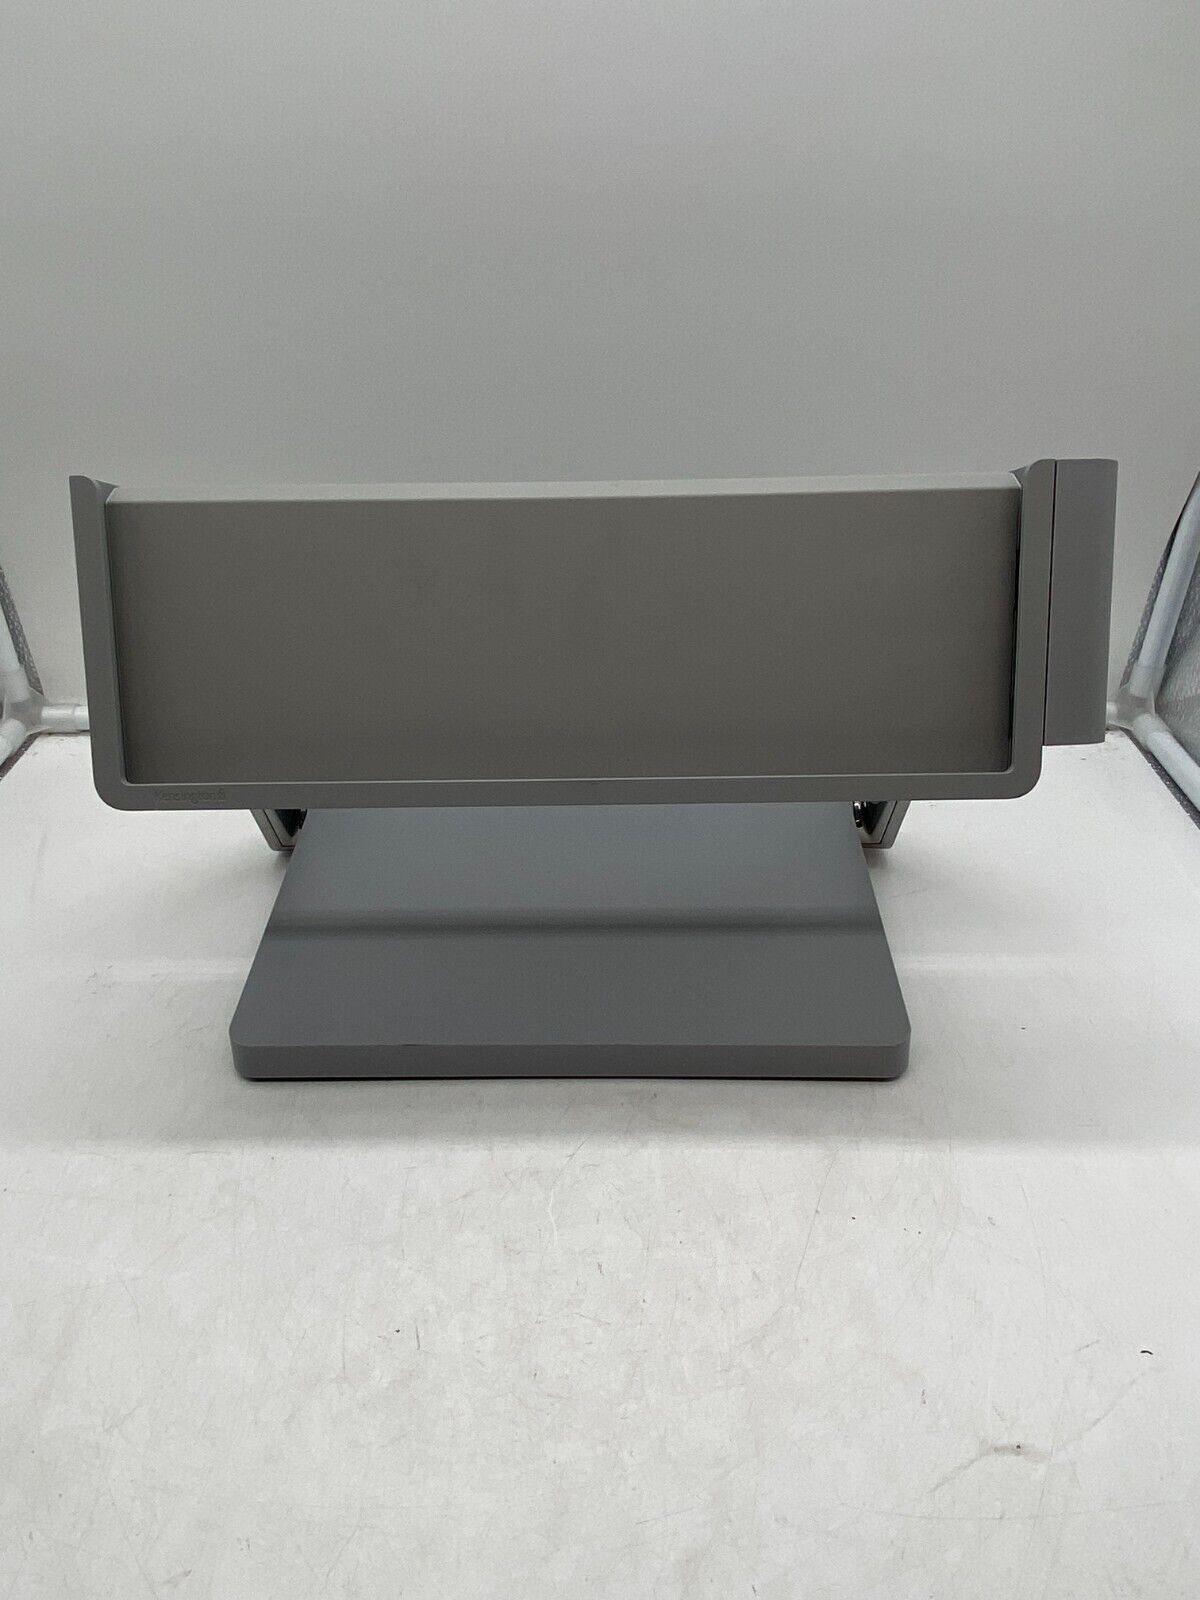 RB Kensington SD7000 Microsoft Surface Pro Docking Station Only 